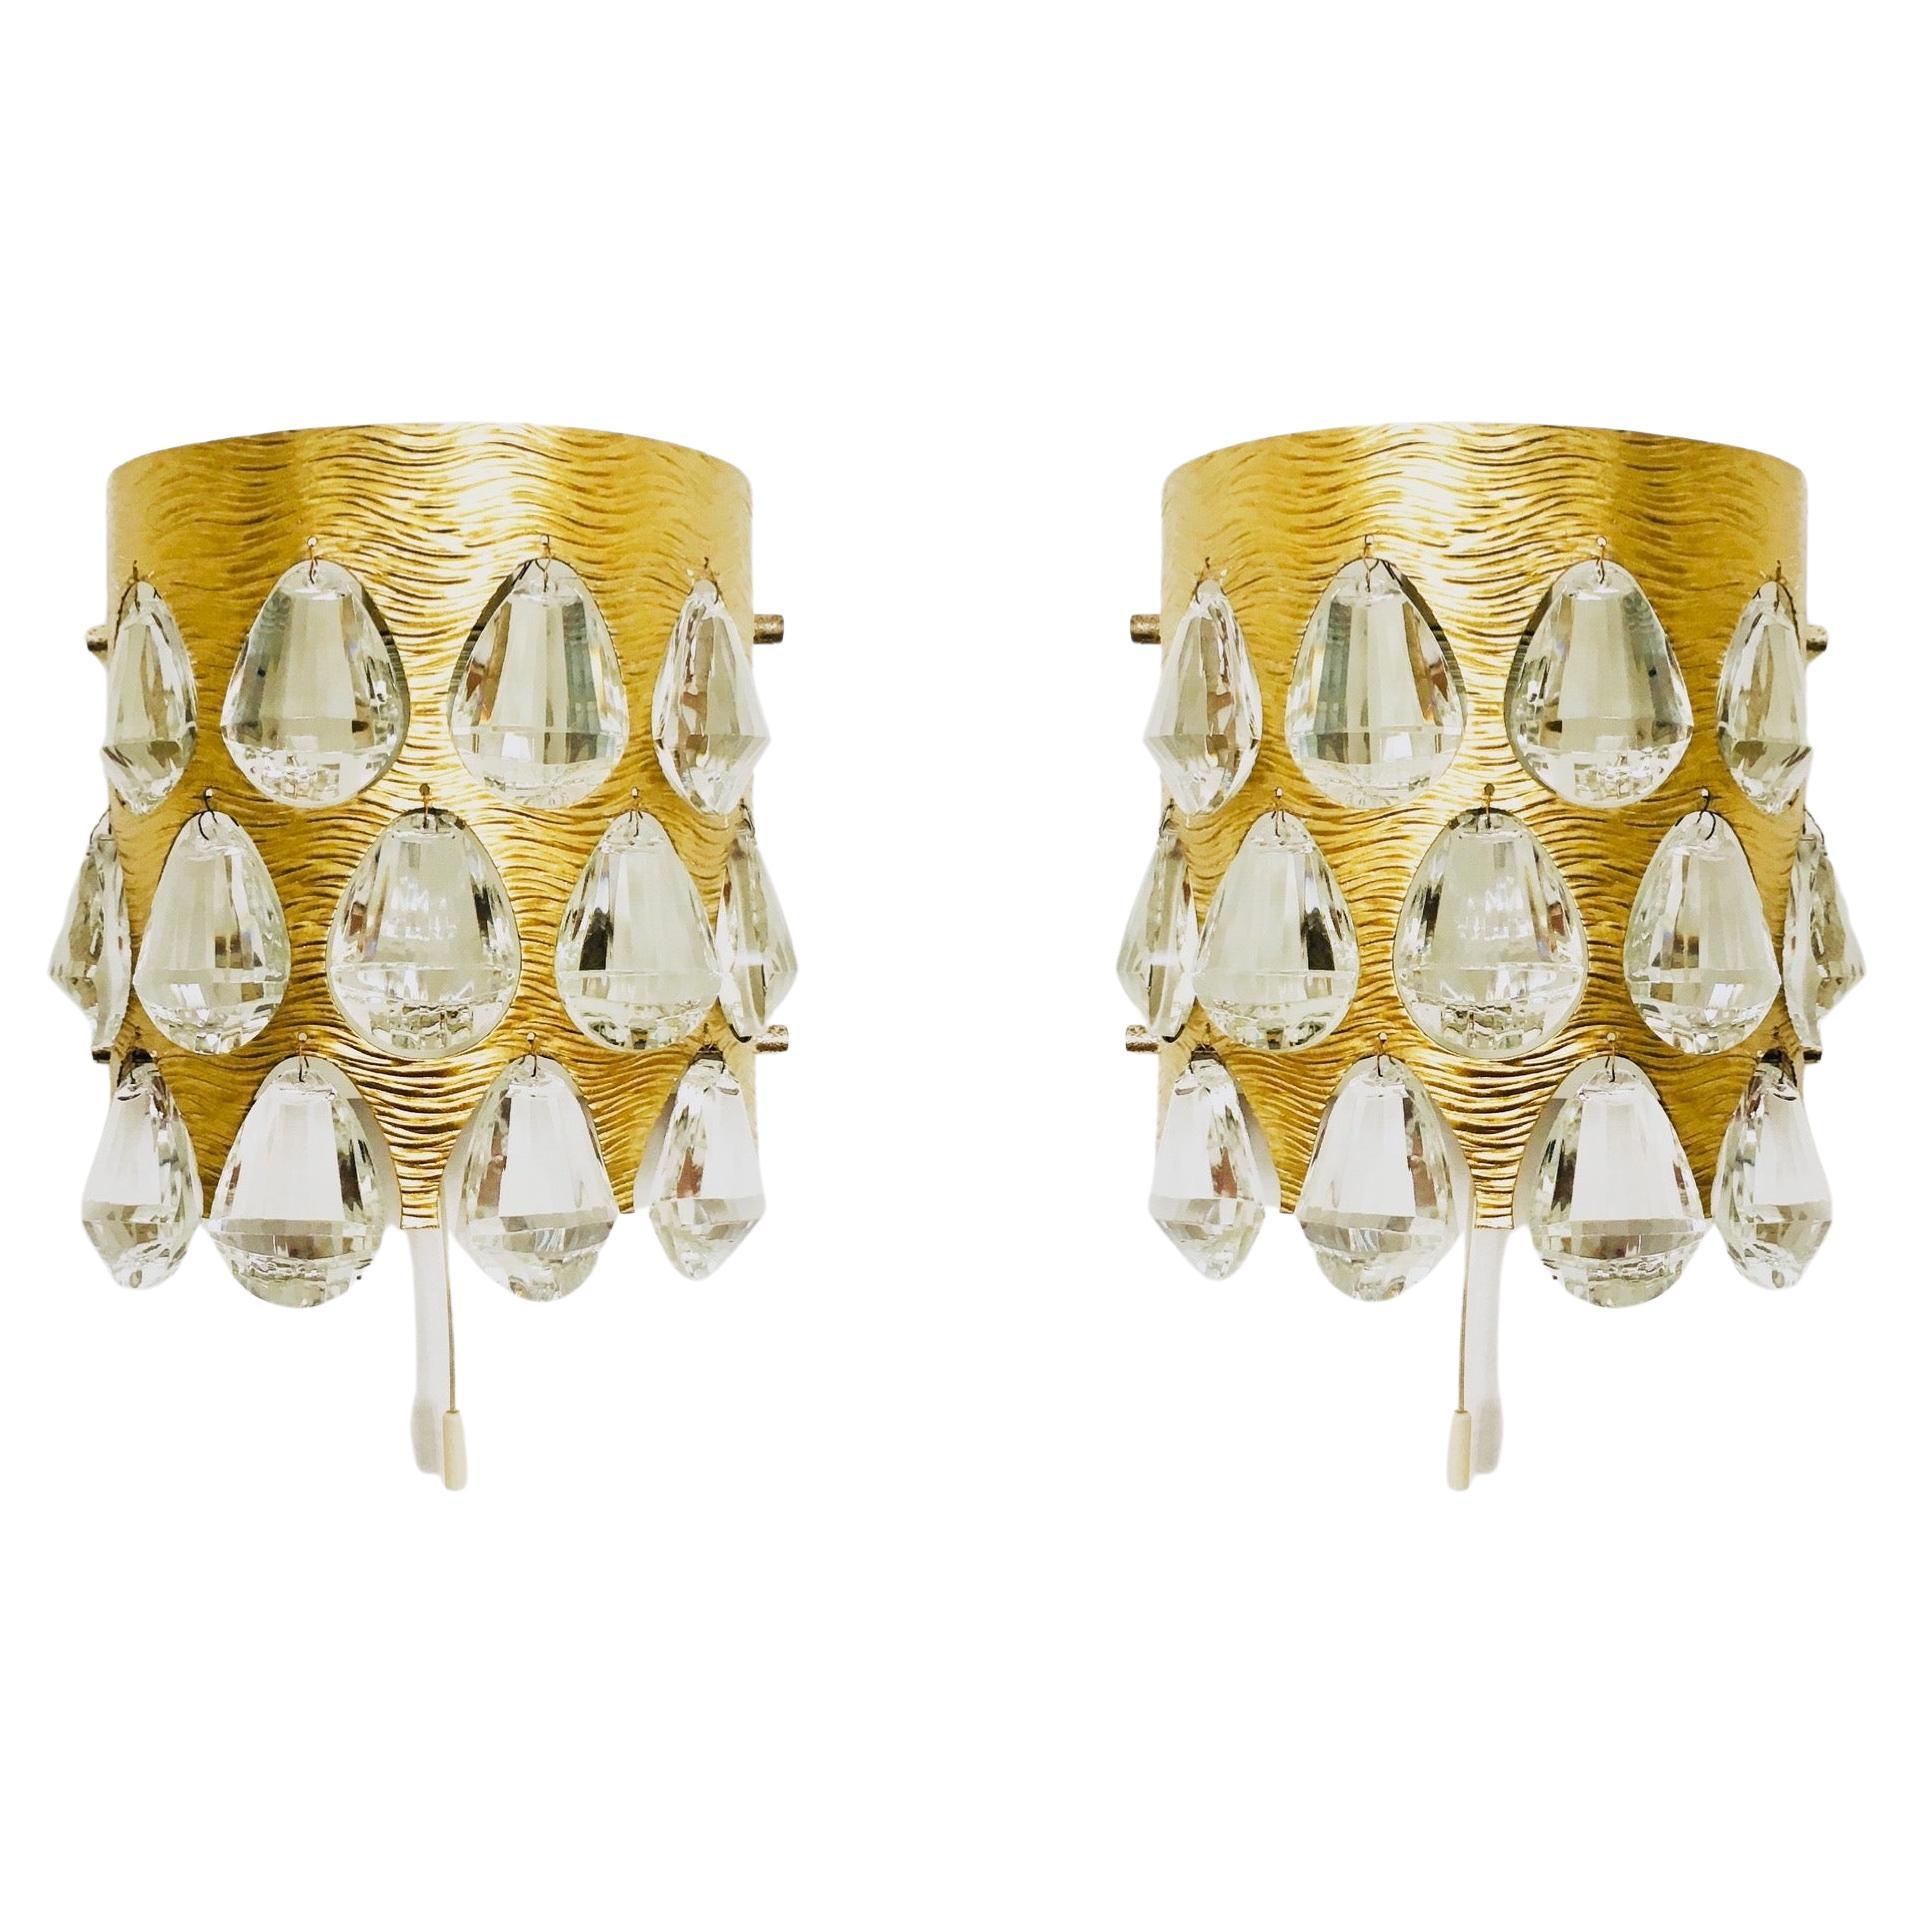 Set of 2 Crystal Glass Wall Lamps by Palwa